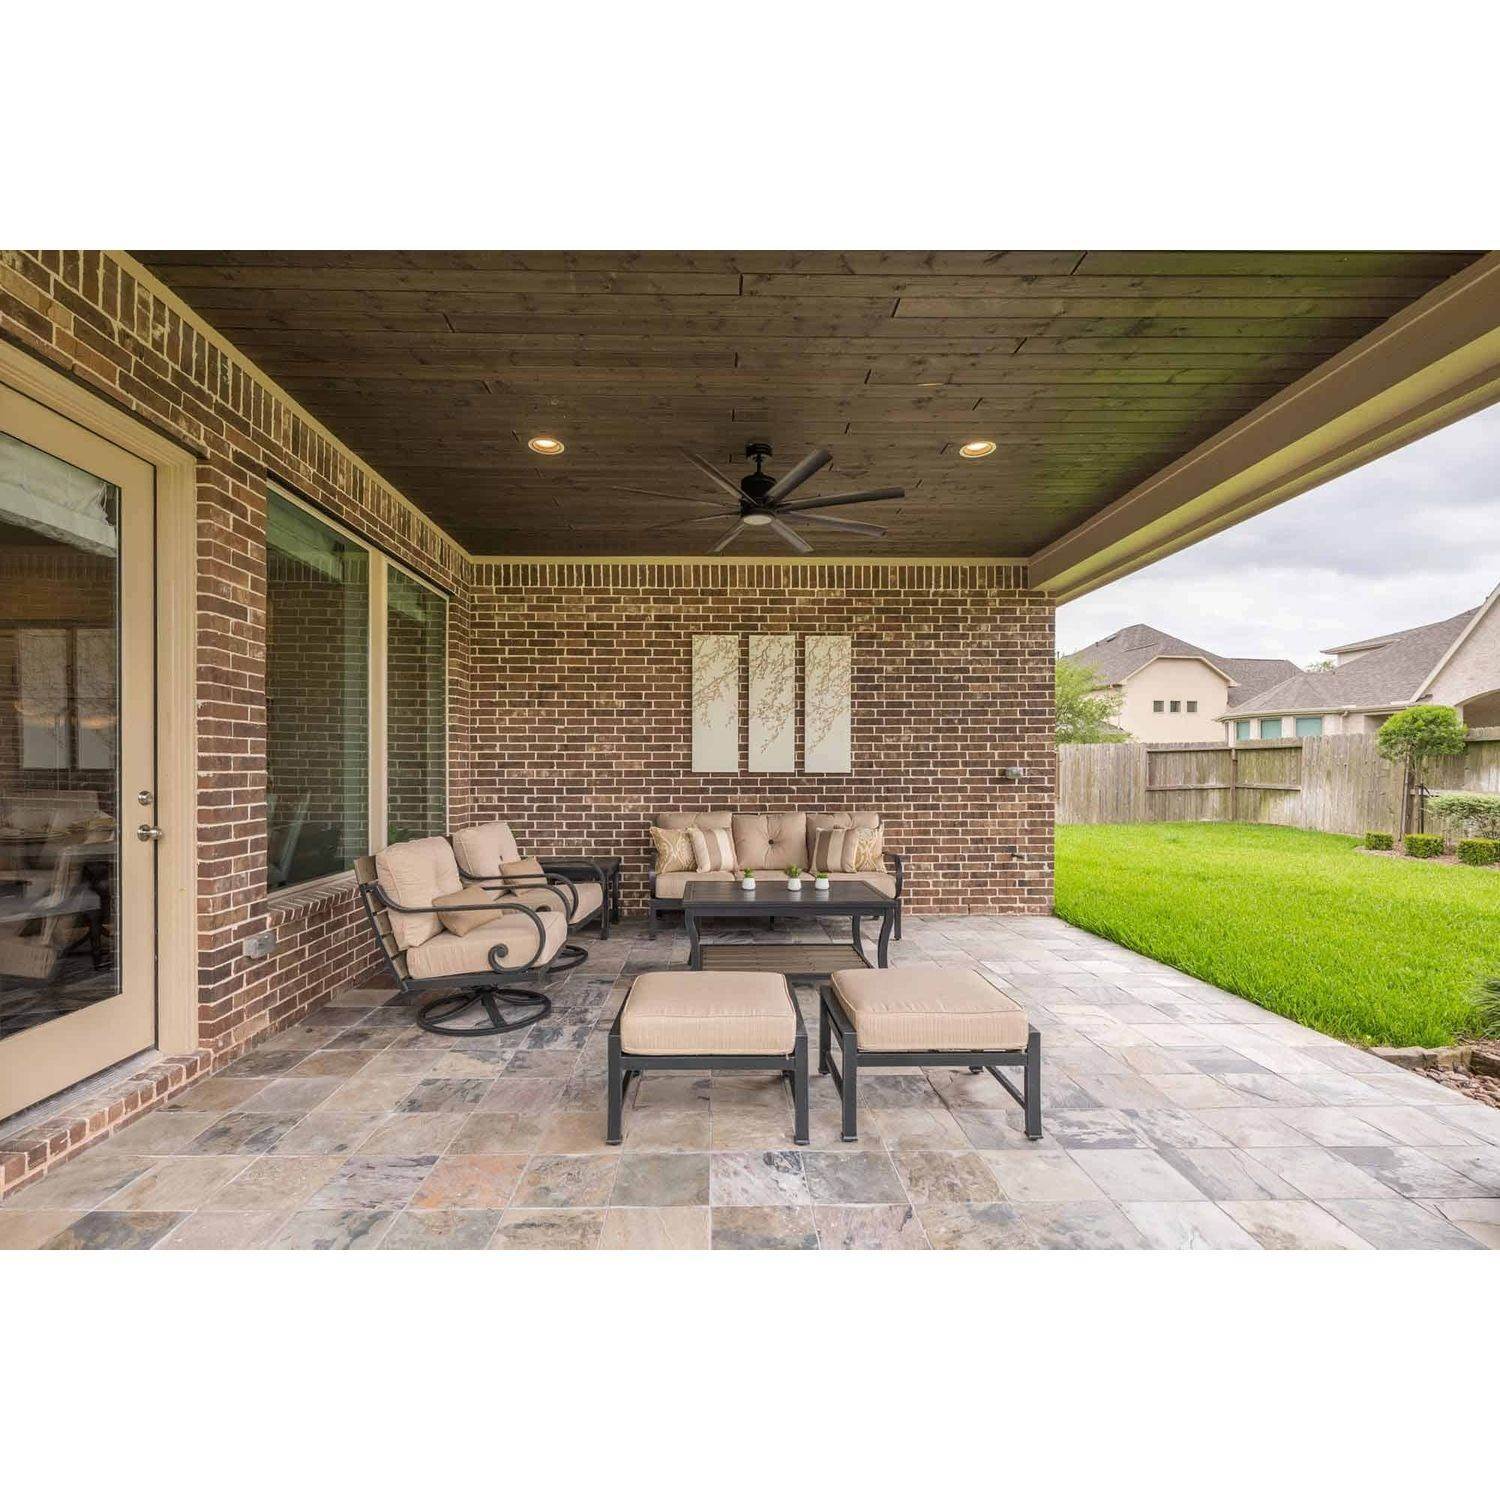 Single Family for Sale at Woodson’s Reserve 80' 4251 Hollow Wind Way, Conroe, TX 77385